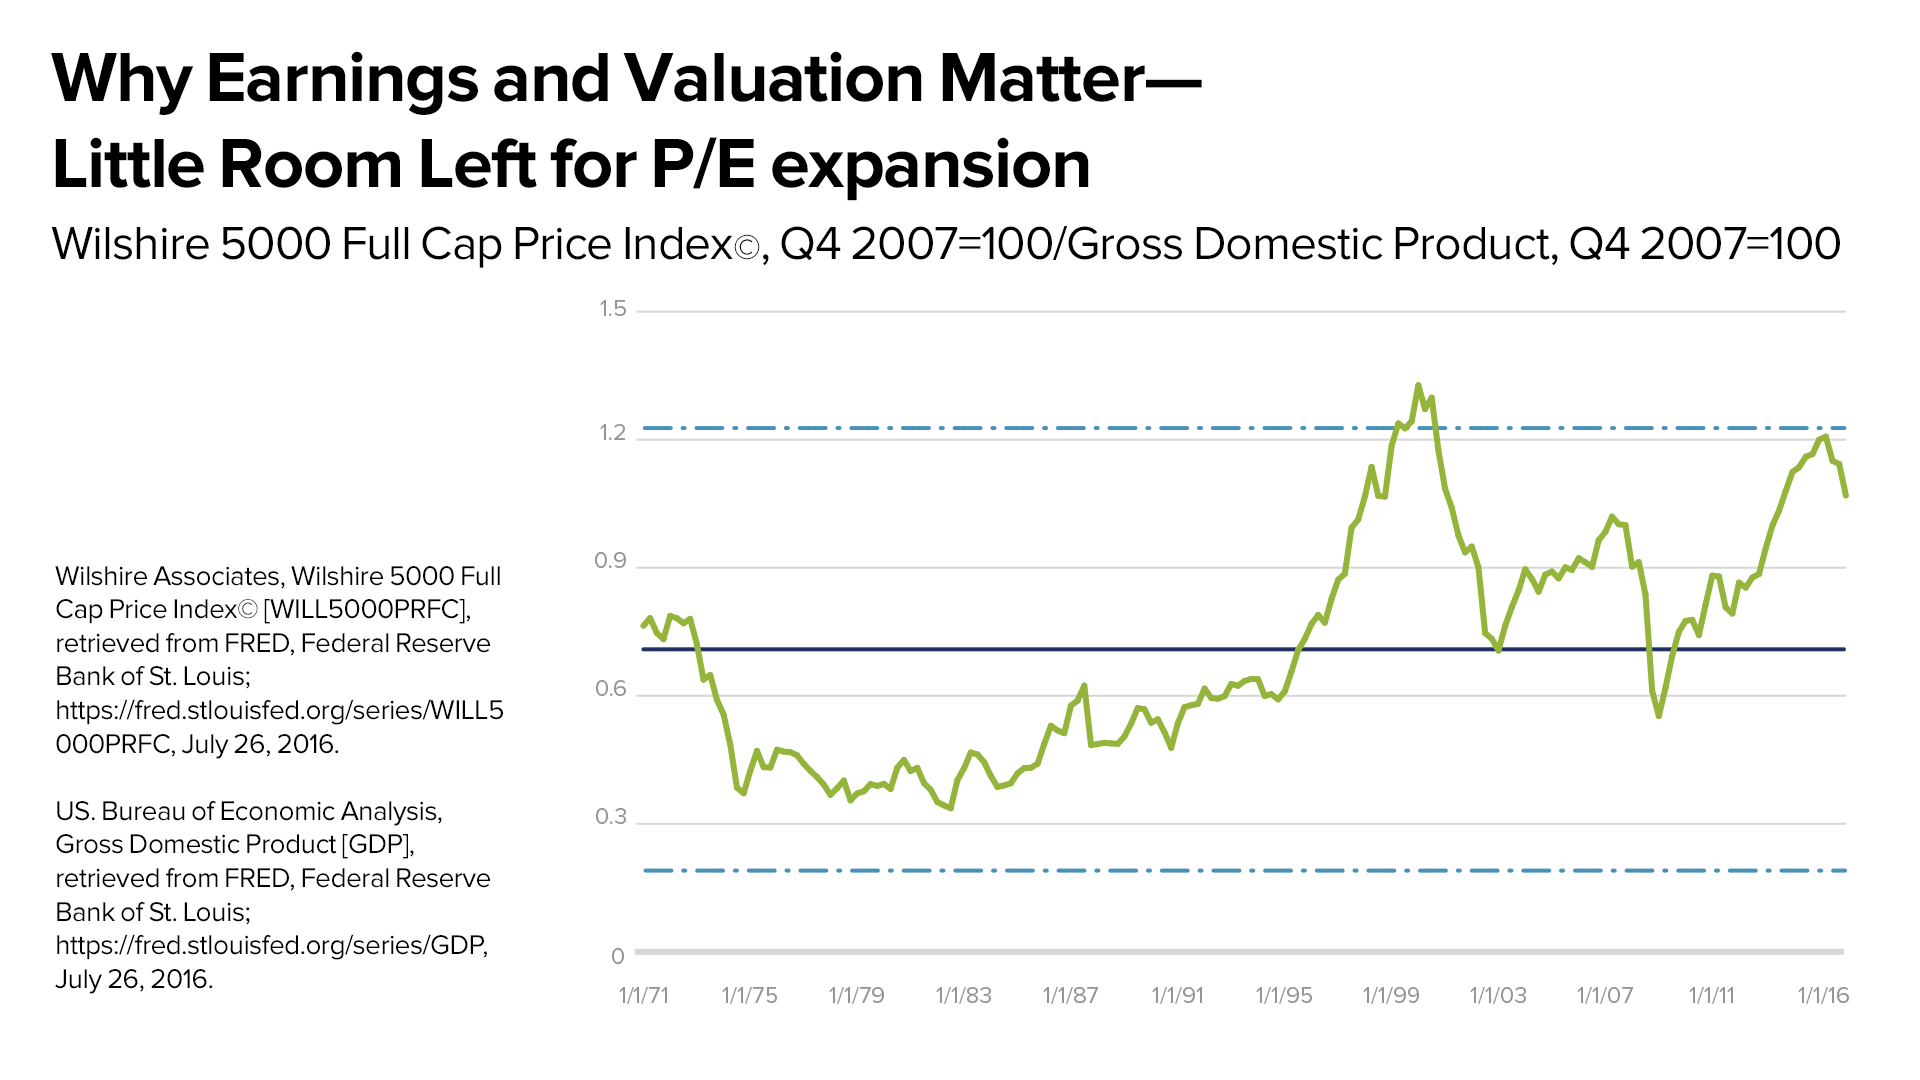 Why Earnings and Valuations Matter - Little Room Left for P/E expansion